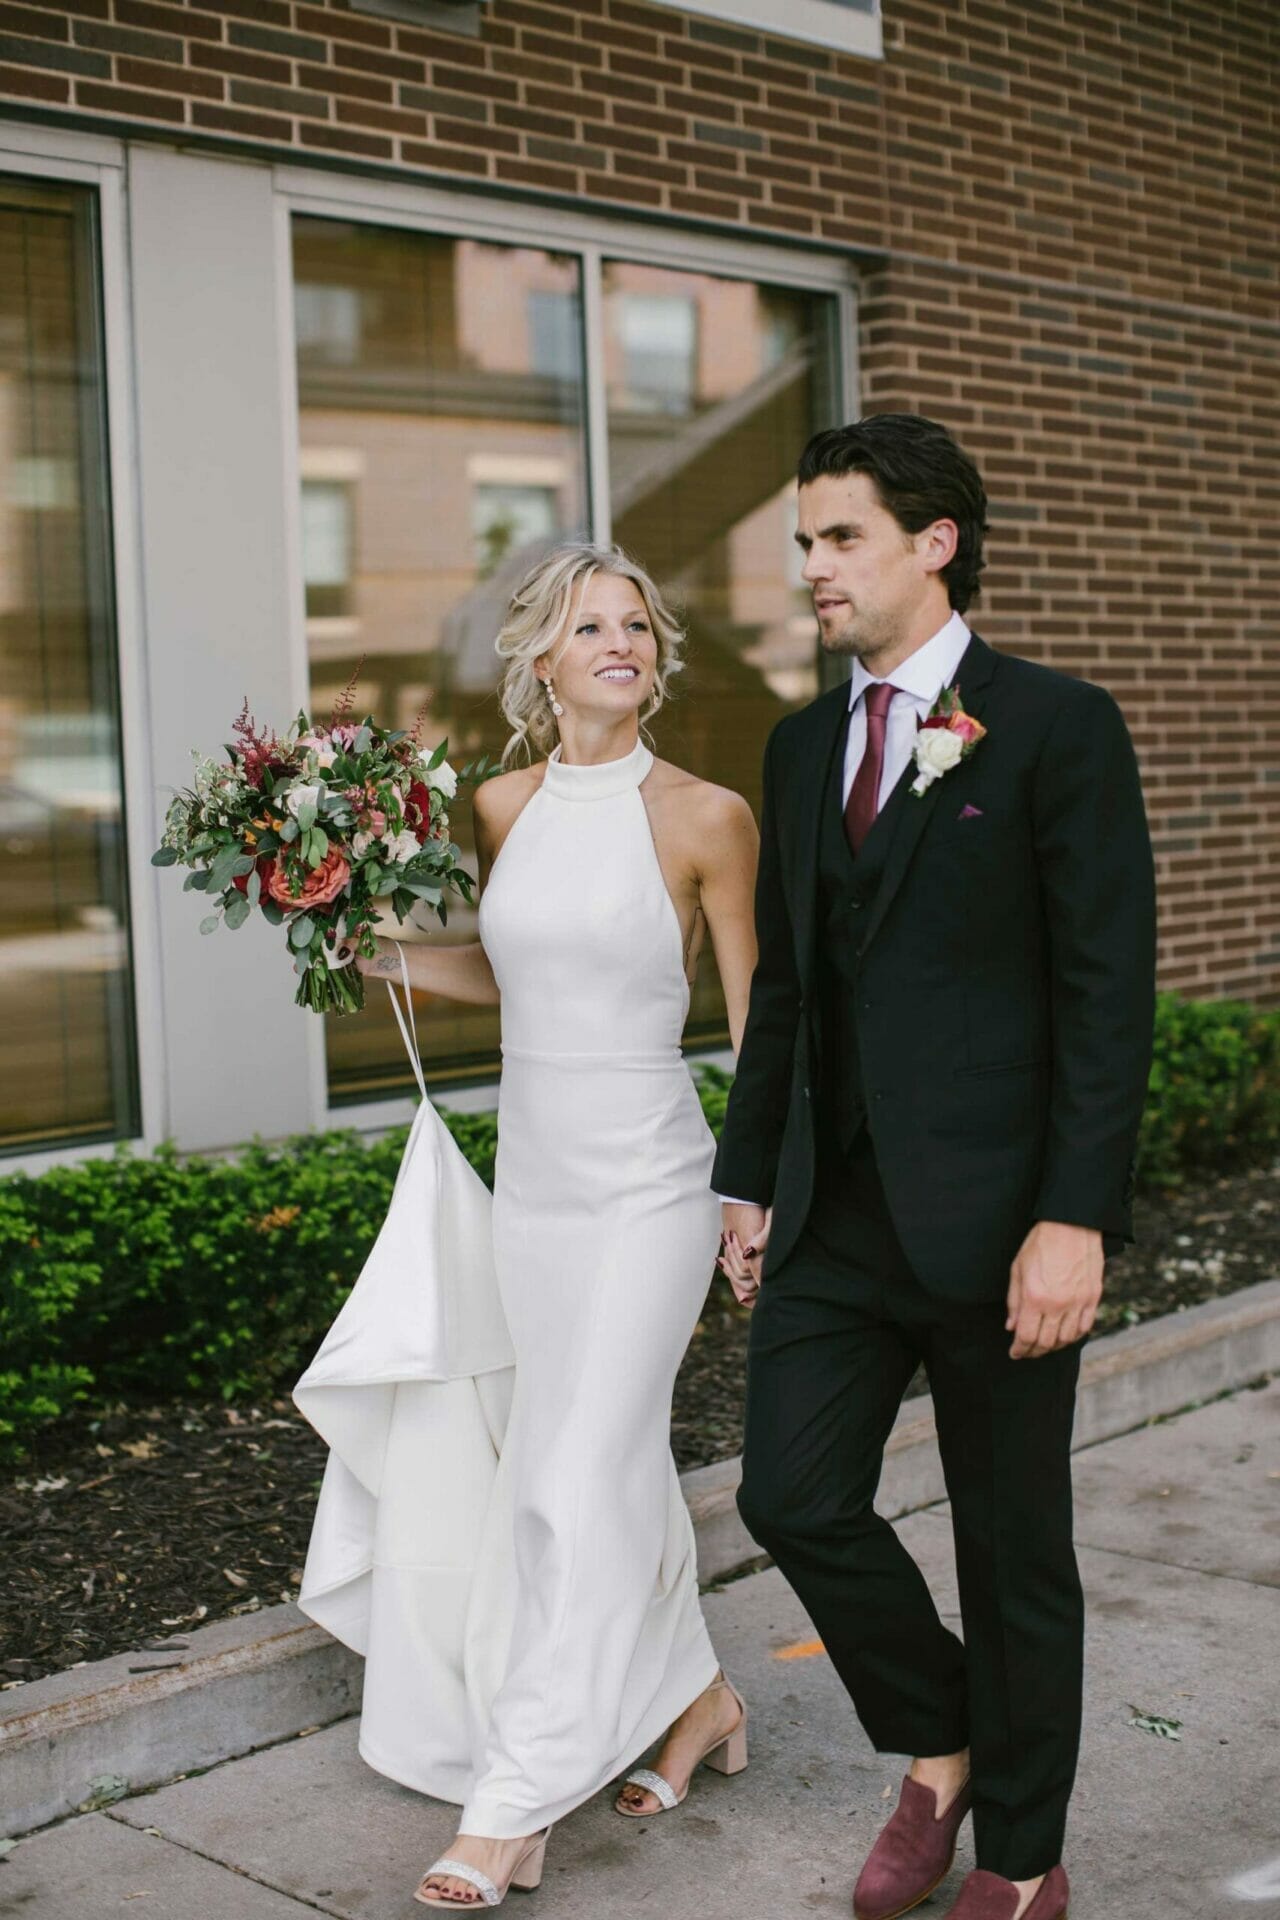 A stunning bride and handsome groom walking down the street, hand in hand, in front of a bridal store.